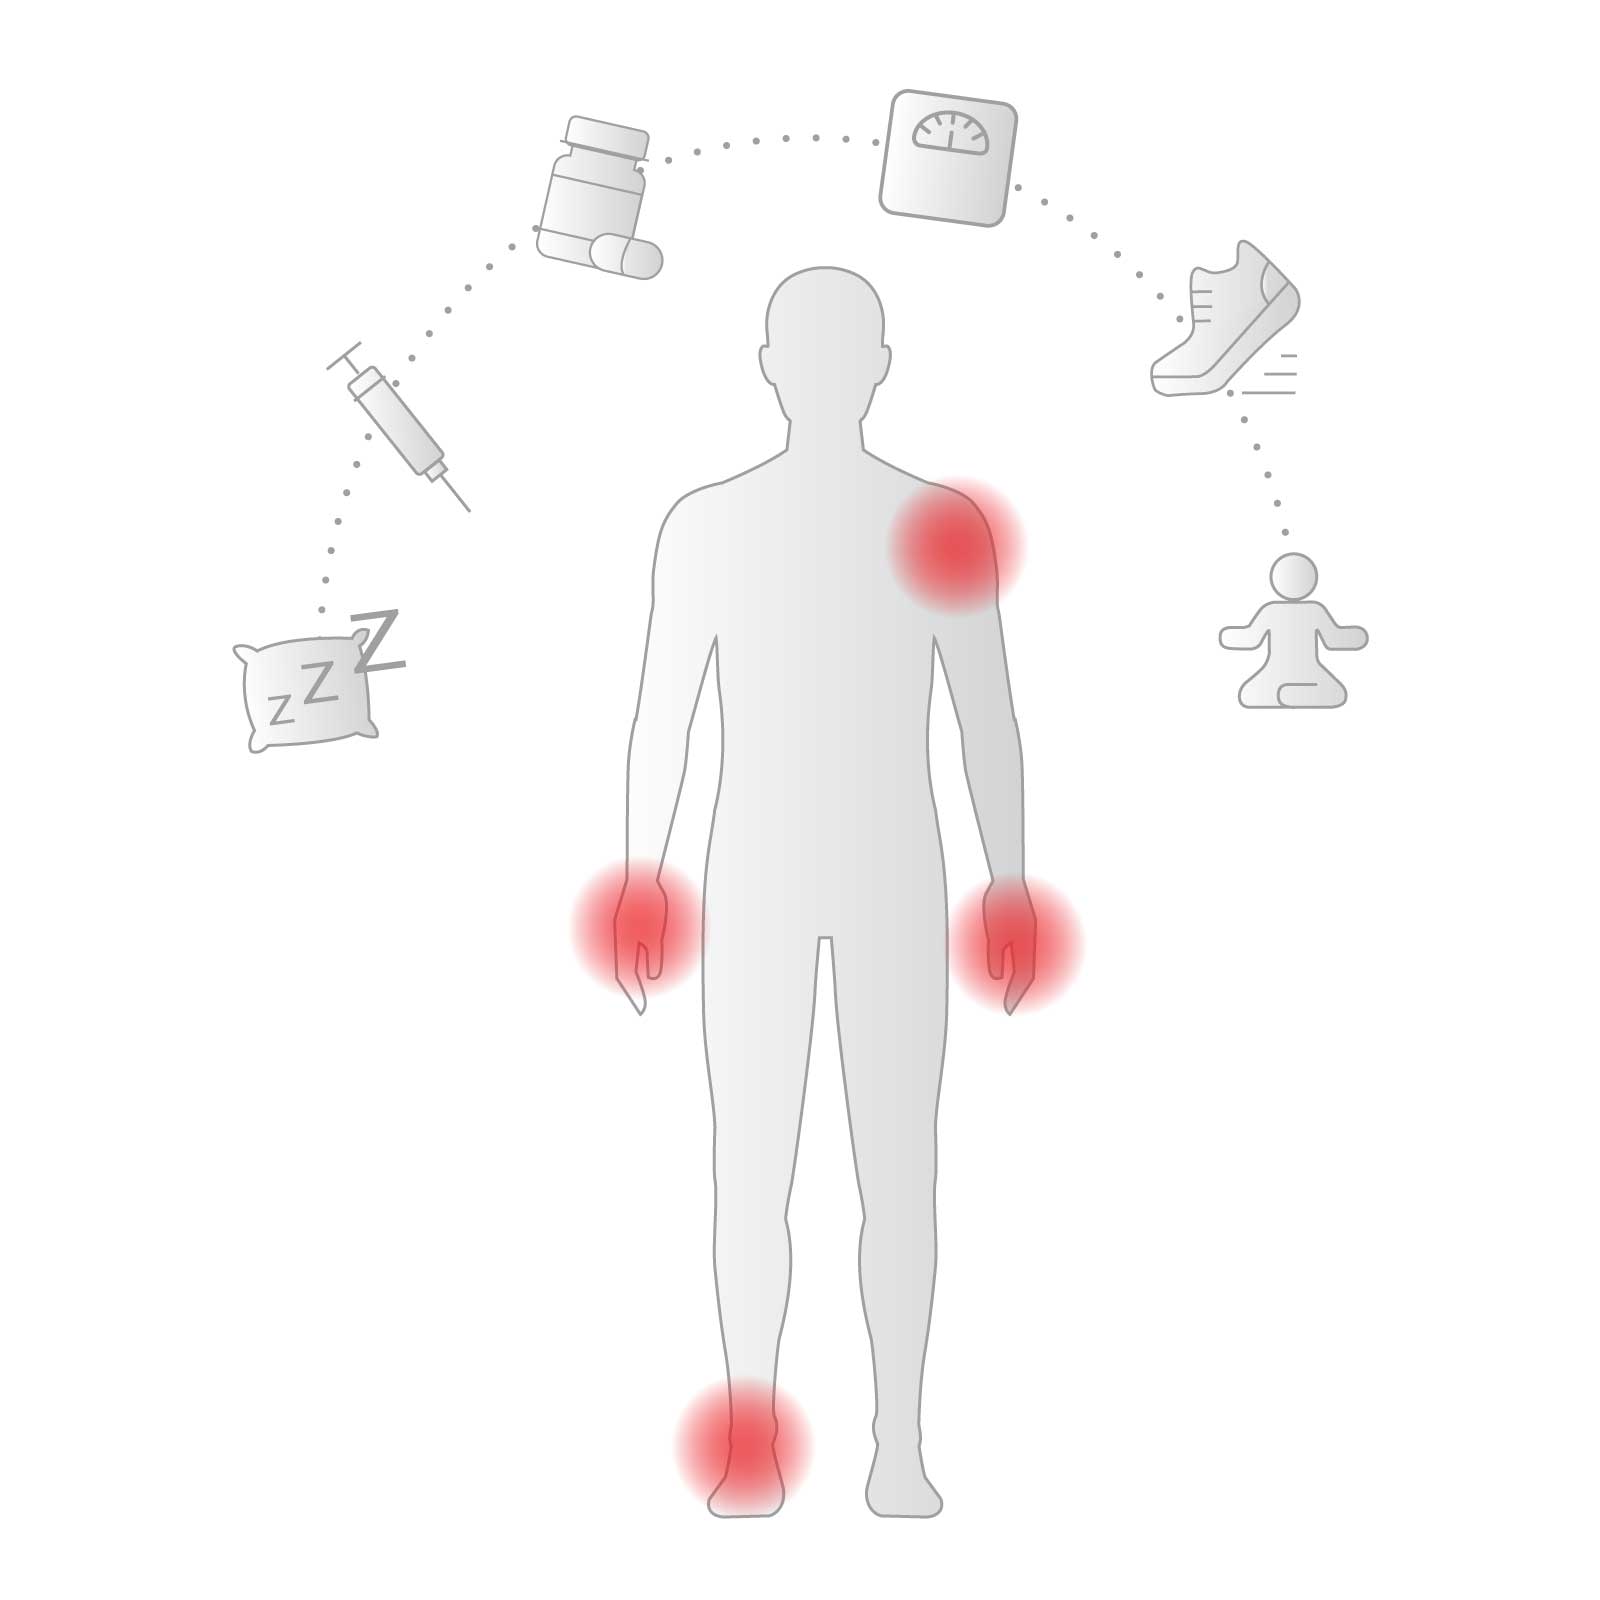 image shows the outline of a person in black and white with red spots on joints indicating pain. The person is surrounded by icons for sleep, medication, weight, exercise and mental health